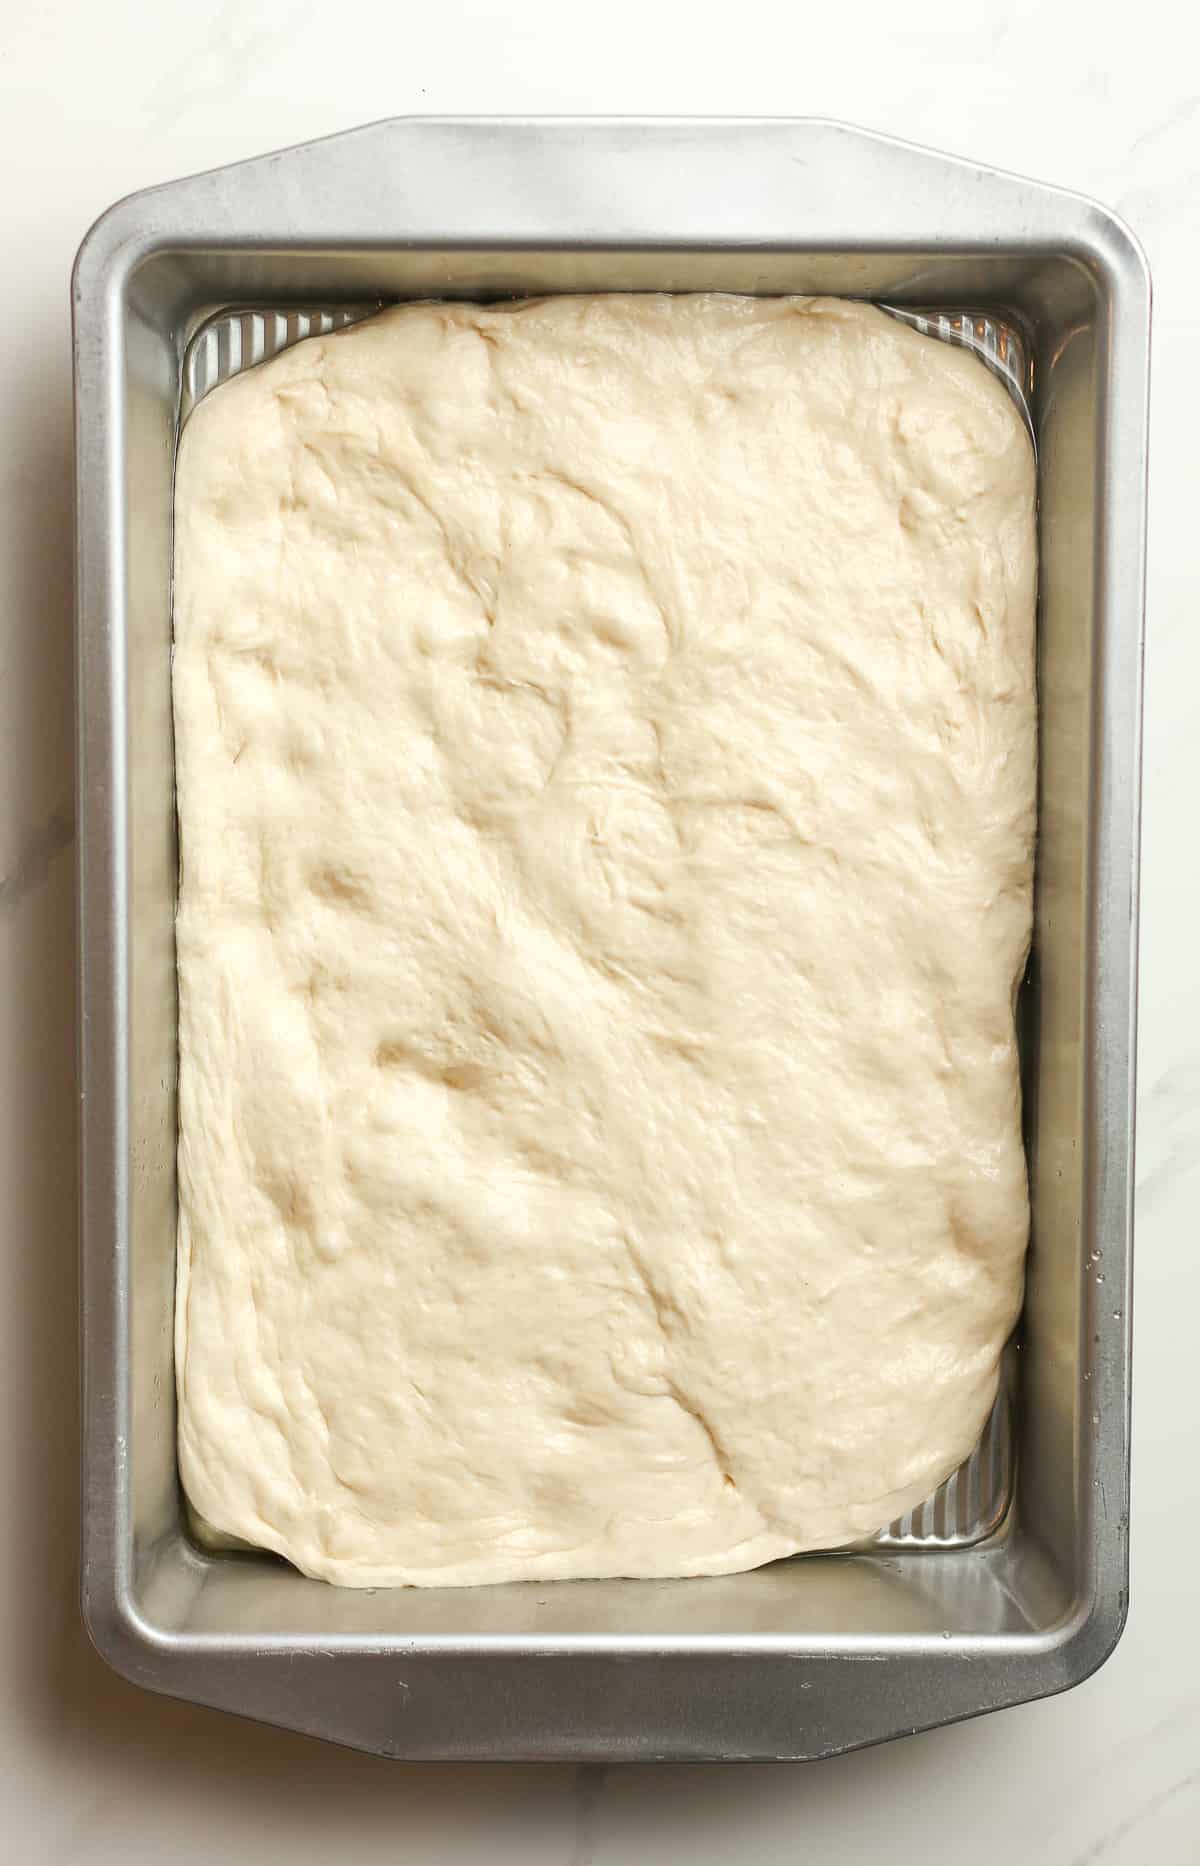 A pan of the the dough, stretched out.